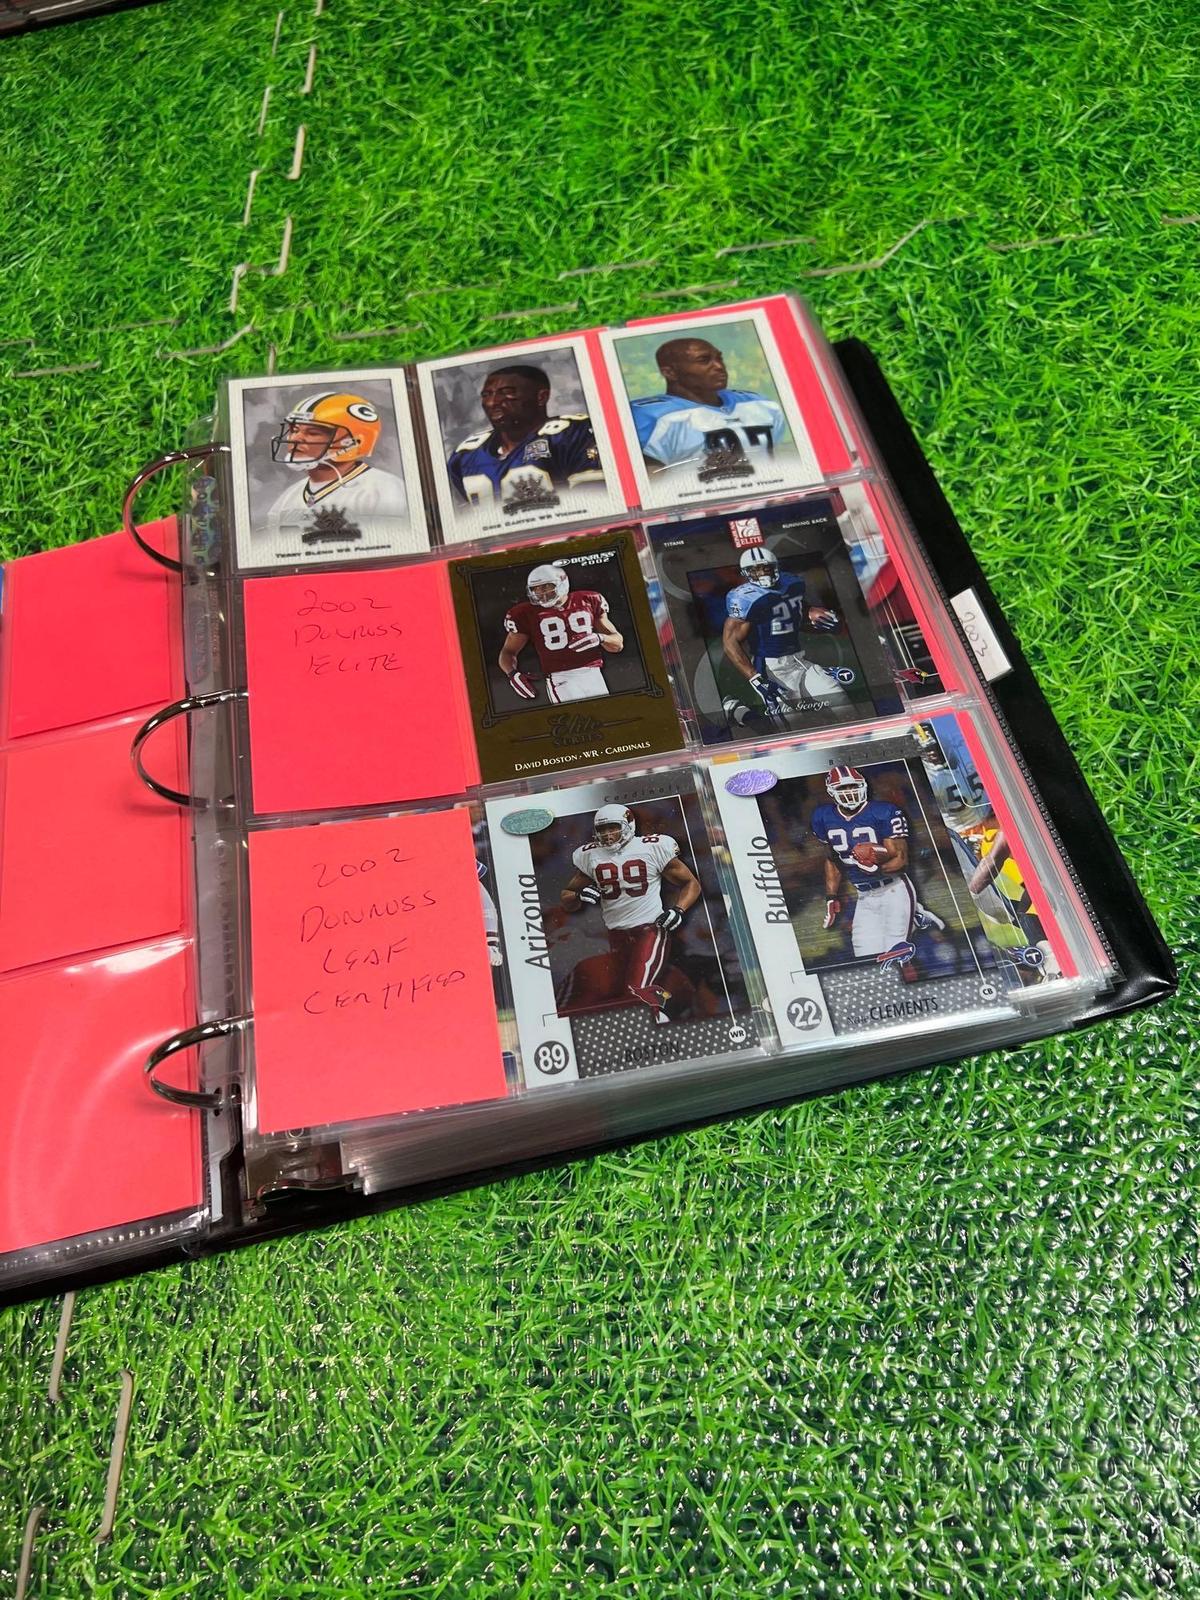 2002-2003 ohio state football player cards